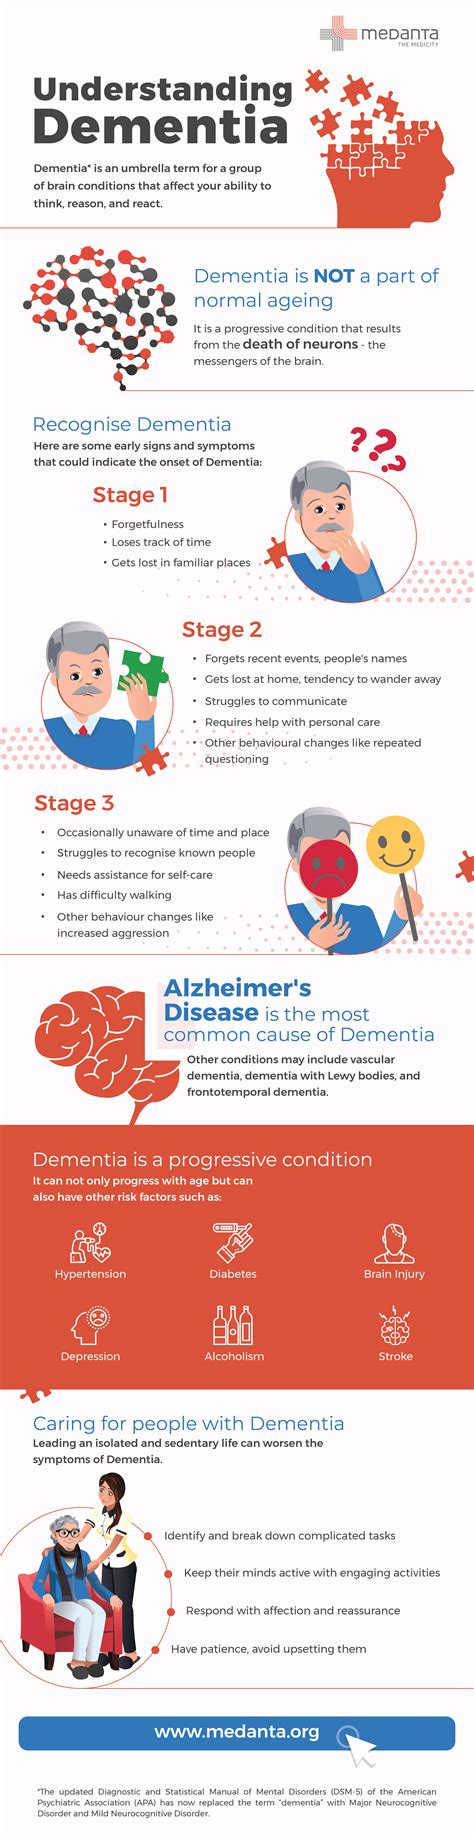 Medanta Dementia What You Need To Know